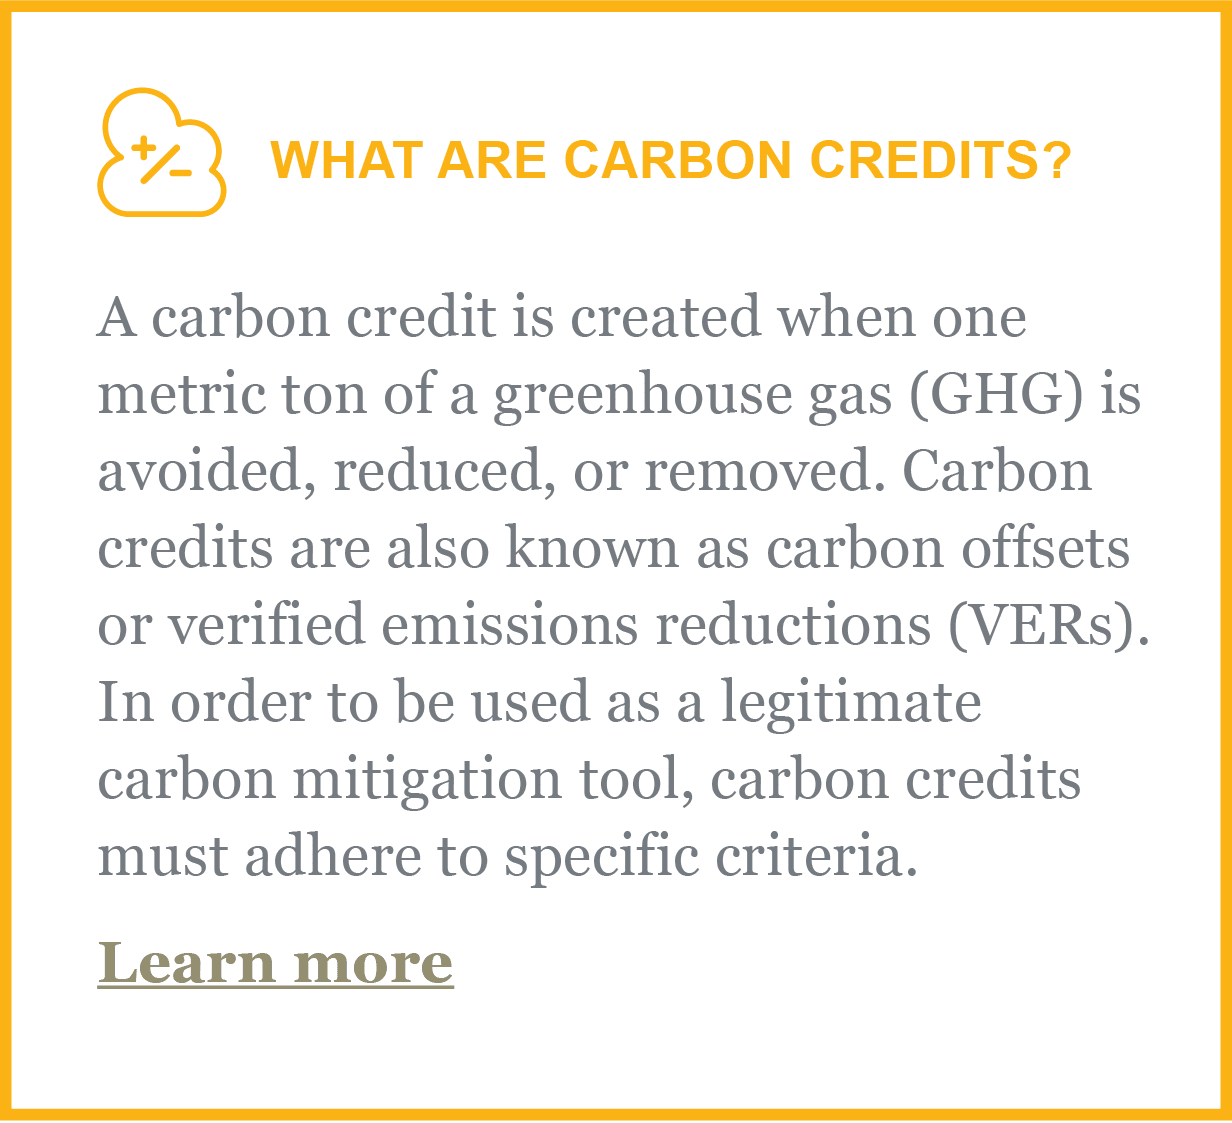 What are carbon credits? A carbon credit is created when one metric ton of a greenhouse gas GHG is avoided, reduced, or removed. Carbon credits are also known as carbon offsets or verified emissions reductions VERs. In order to be used as a legitimate carbon mitigation tool, carbon credits mus adhere to specific criteria.